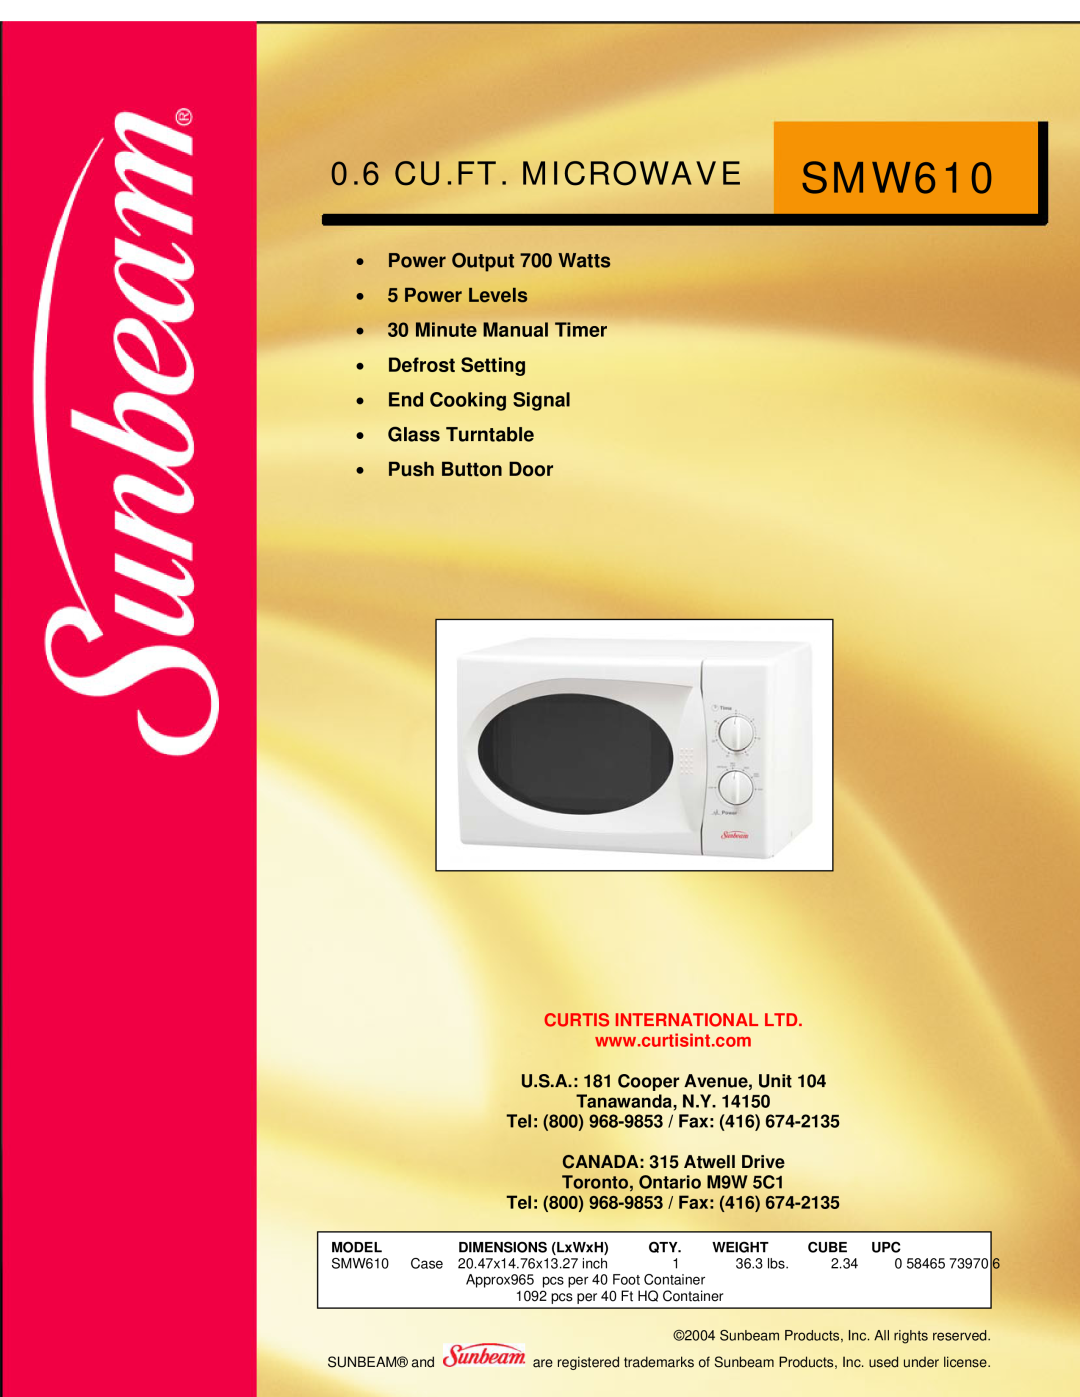 Sunbeam dimensions 0.6 CU.FT. MICROWAVE SMW610, Power Output 700 Watts 5 Power Levels, Push Button Door, Model, Weight 